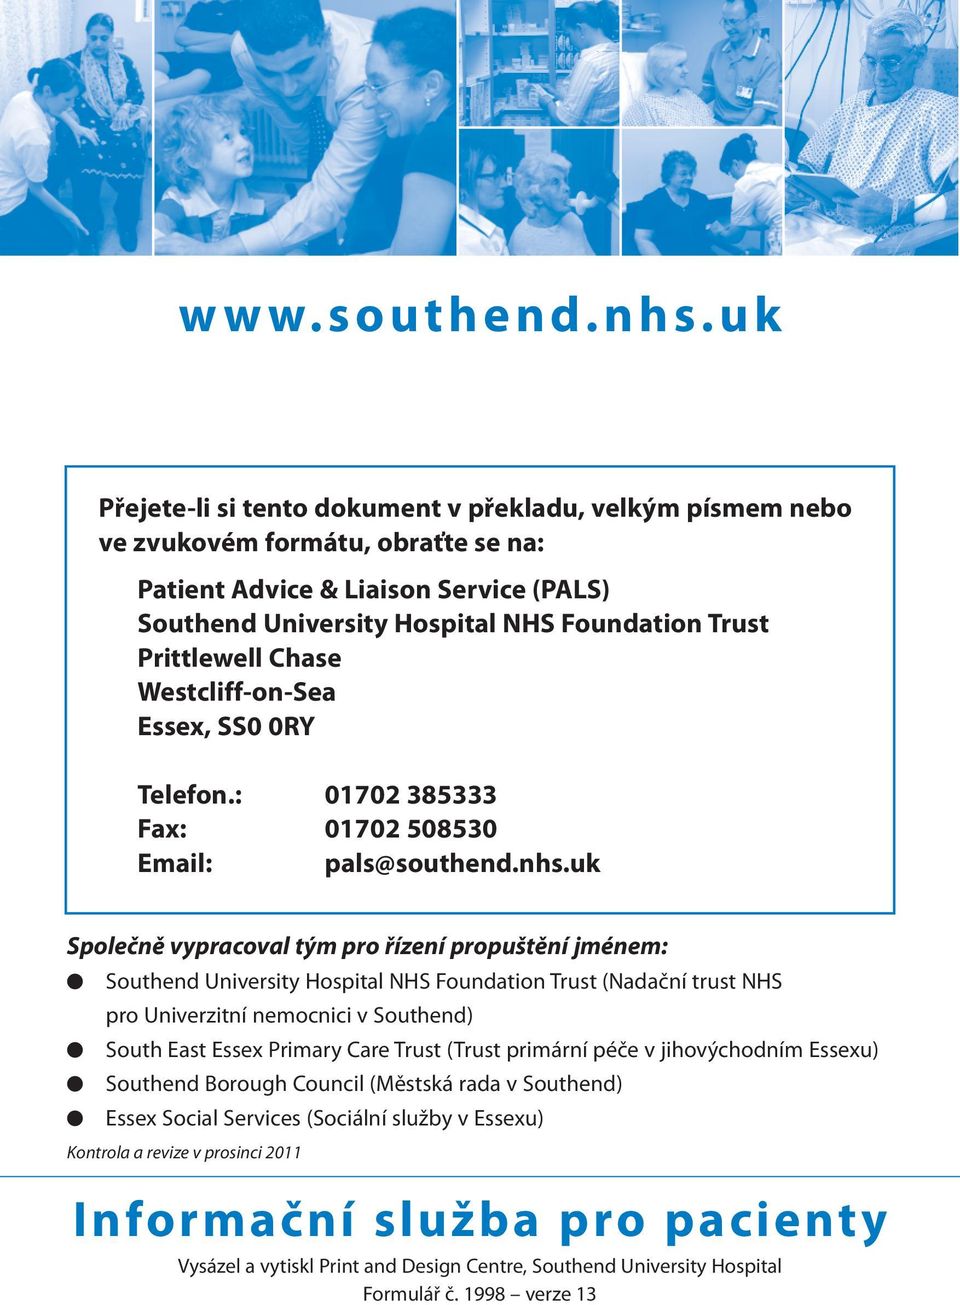 Prittlewell Chase Westcliff-on-Sea Essex, SS0 0RY Telefon.: 01702 385333 Fax: 01702 508530 Email: pals@southend.nhs.